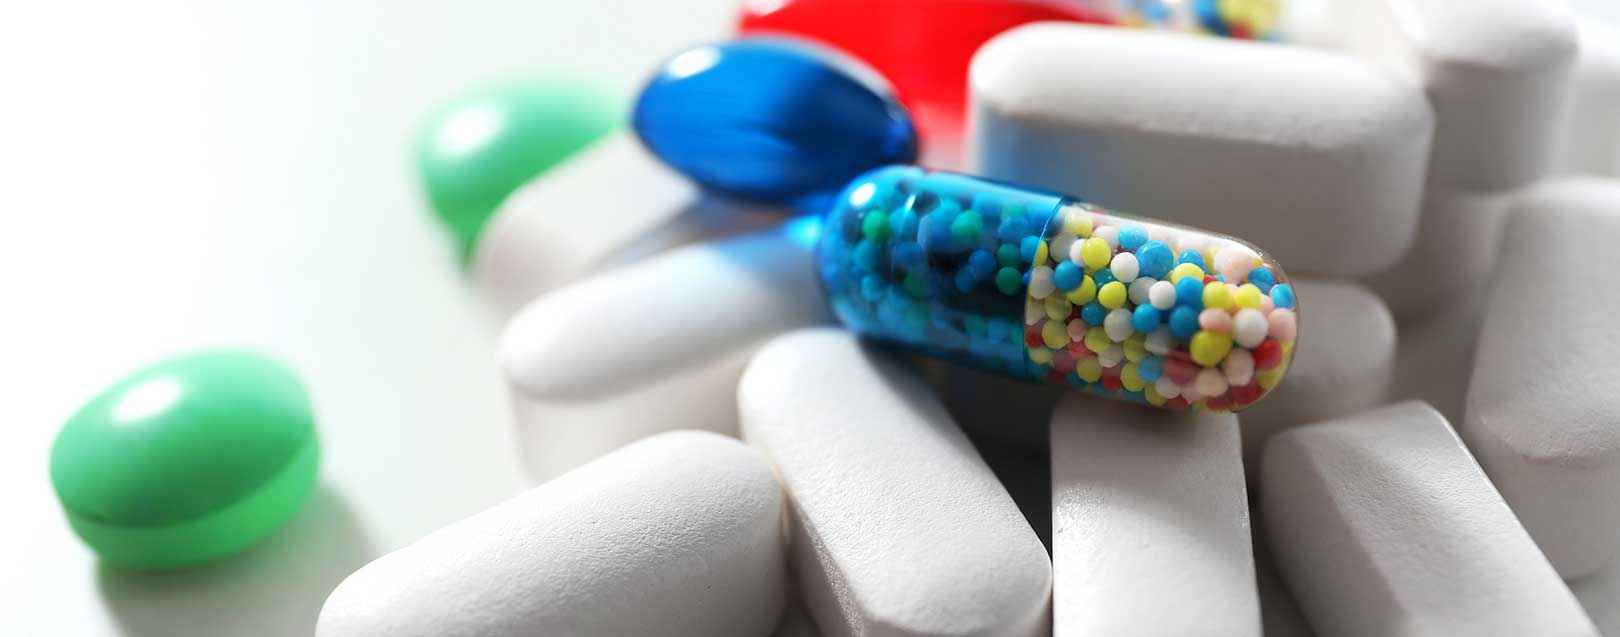 Indian drug firms to see moderation in growth in US